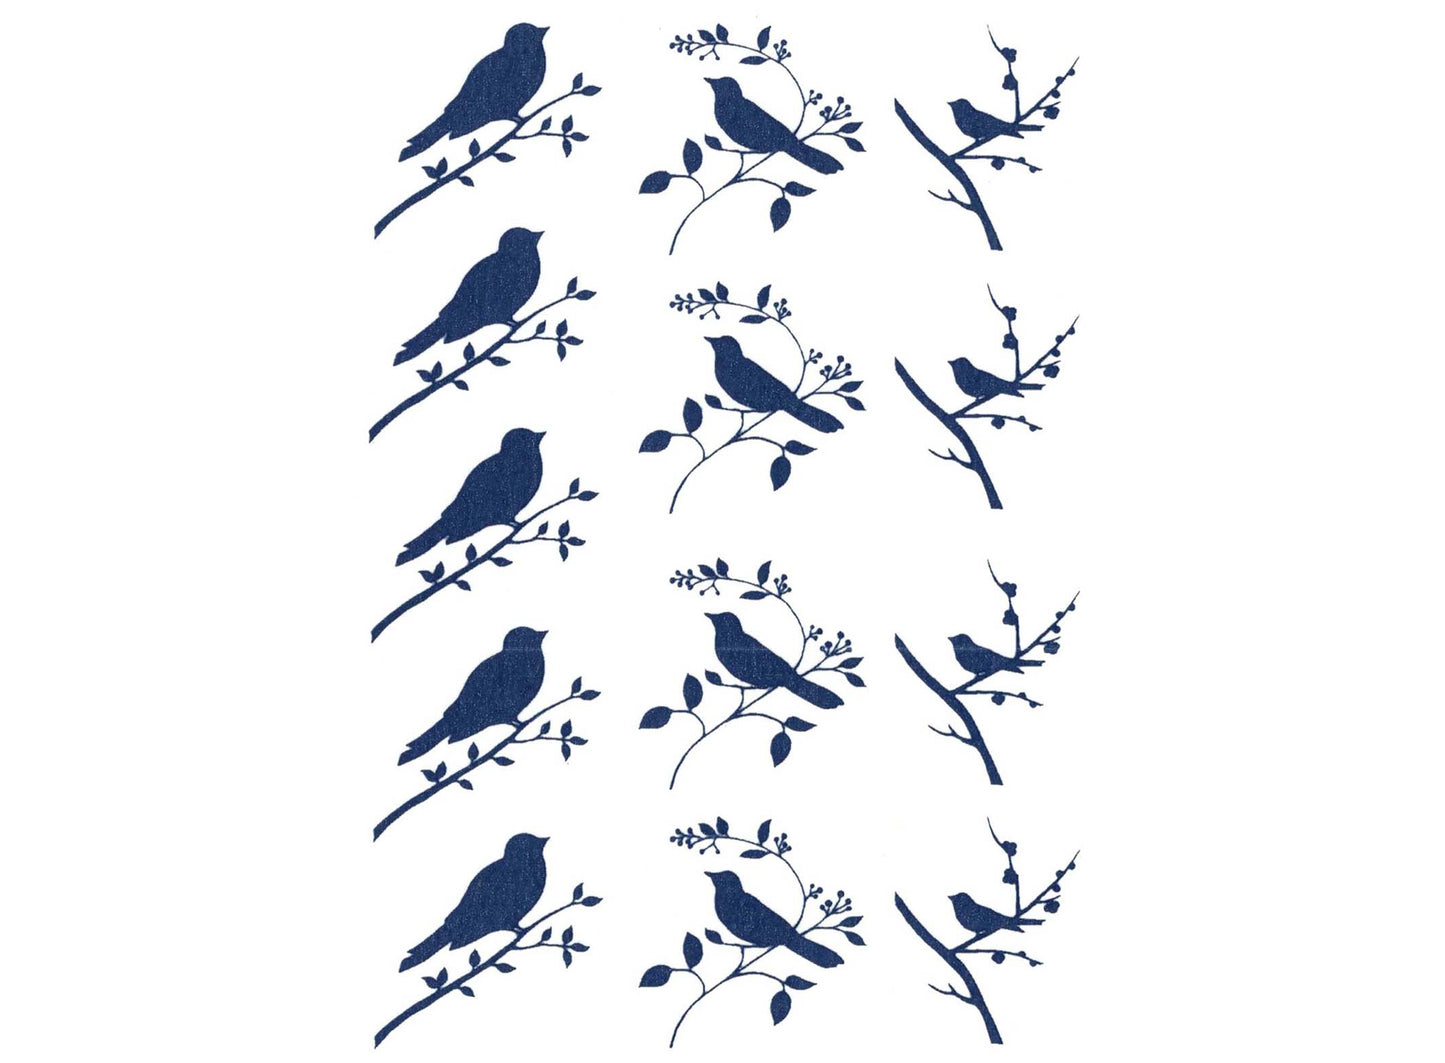 Bird On Branch 13 Pcs 1-1/8" Blue Fused Glass Decals